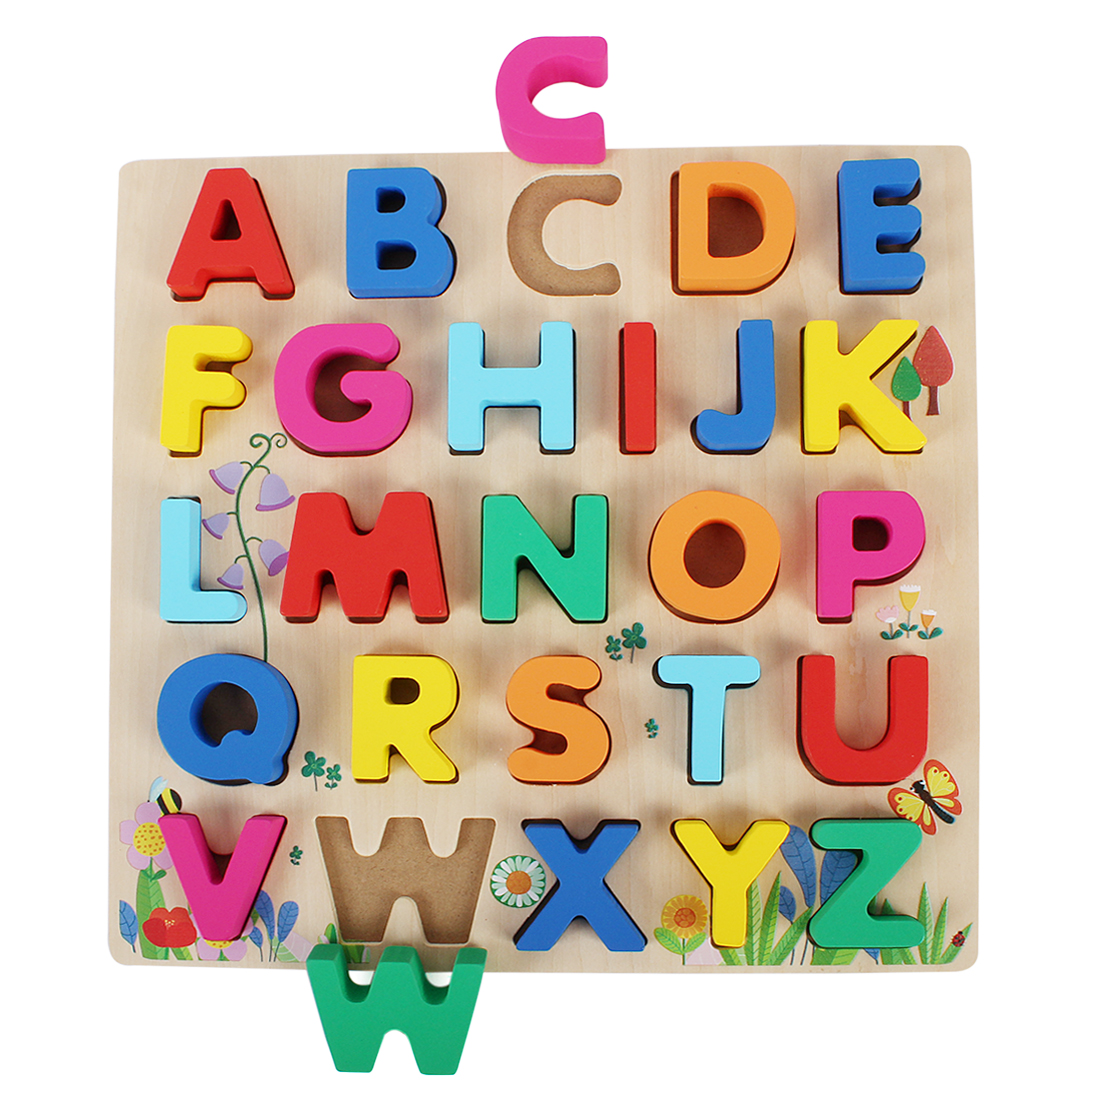 DSY0008-DESIYA,Knob puzzle , Jigsaw puzzle, Chunky puzzle, Other fun puzzle, Cube puzzle, Puzzle in the box,Wooden Block ,Marble Run,Doll House,Kitchen set, wooden outdoor